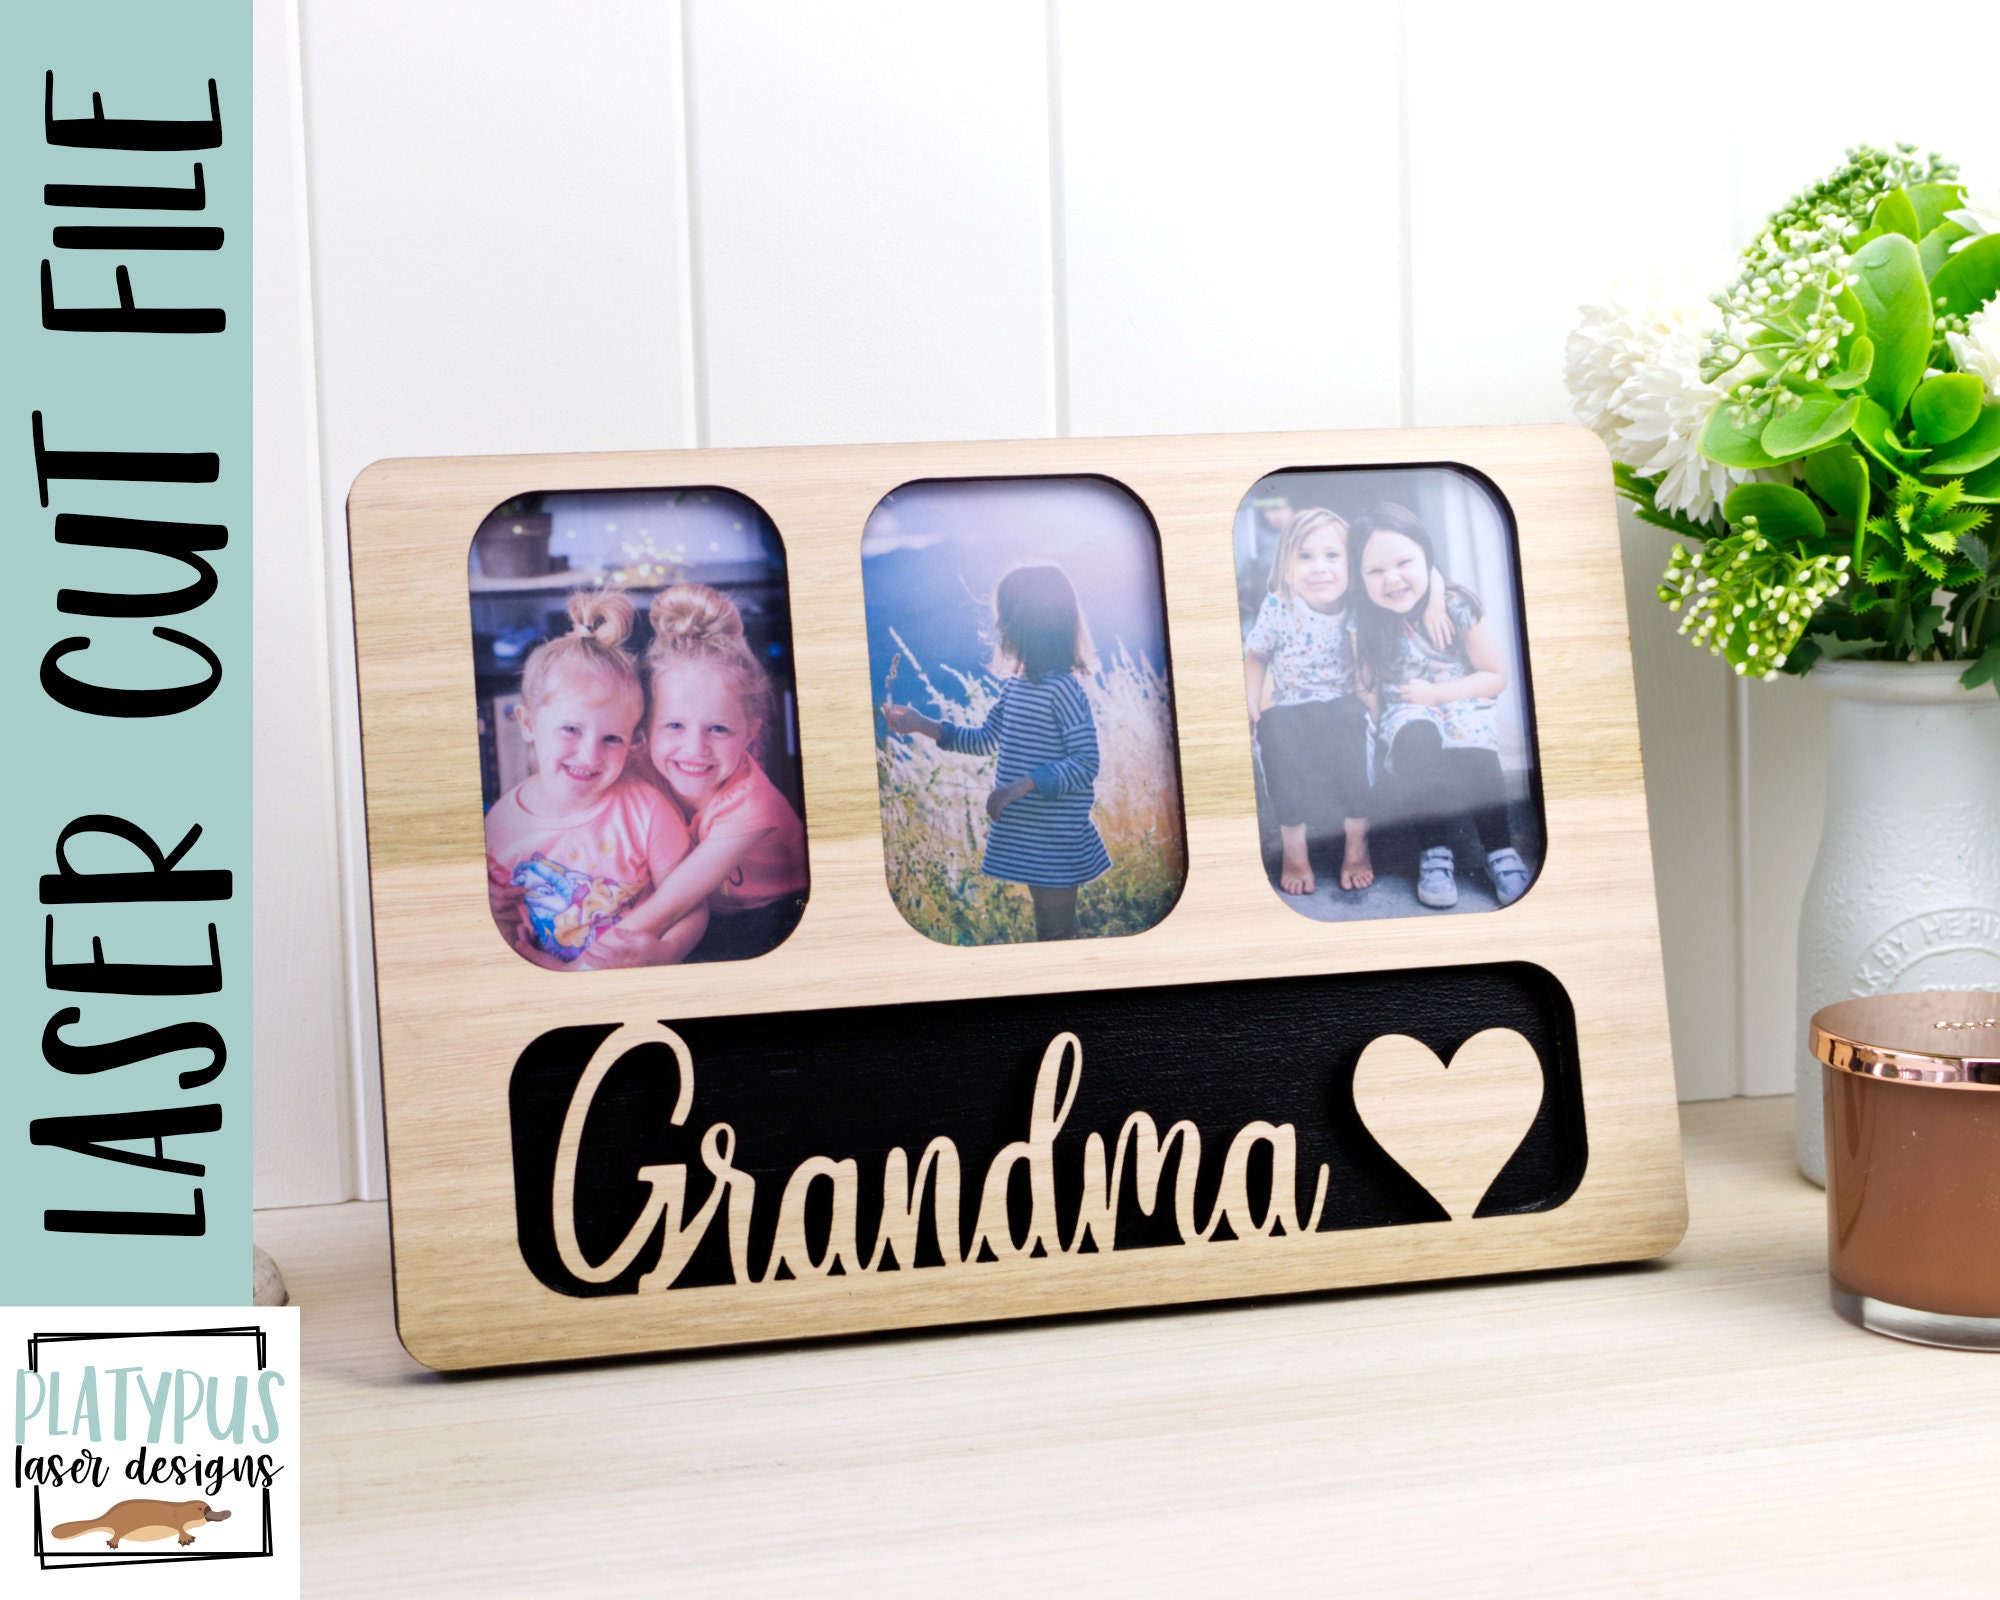 Easymoo Birthday Gifts for Women,Mothers Day Gifts for Mom, Birthday Gifts  from Daughter Son, Gift Box,Unique 4x6 Picture Frame